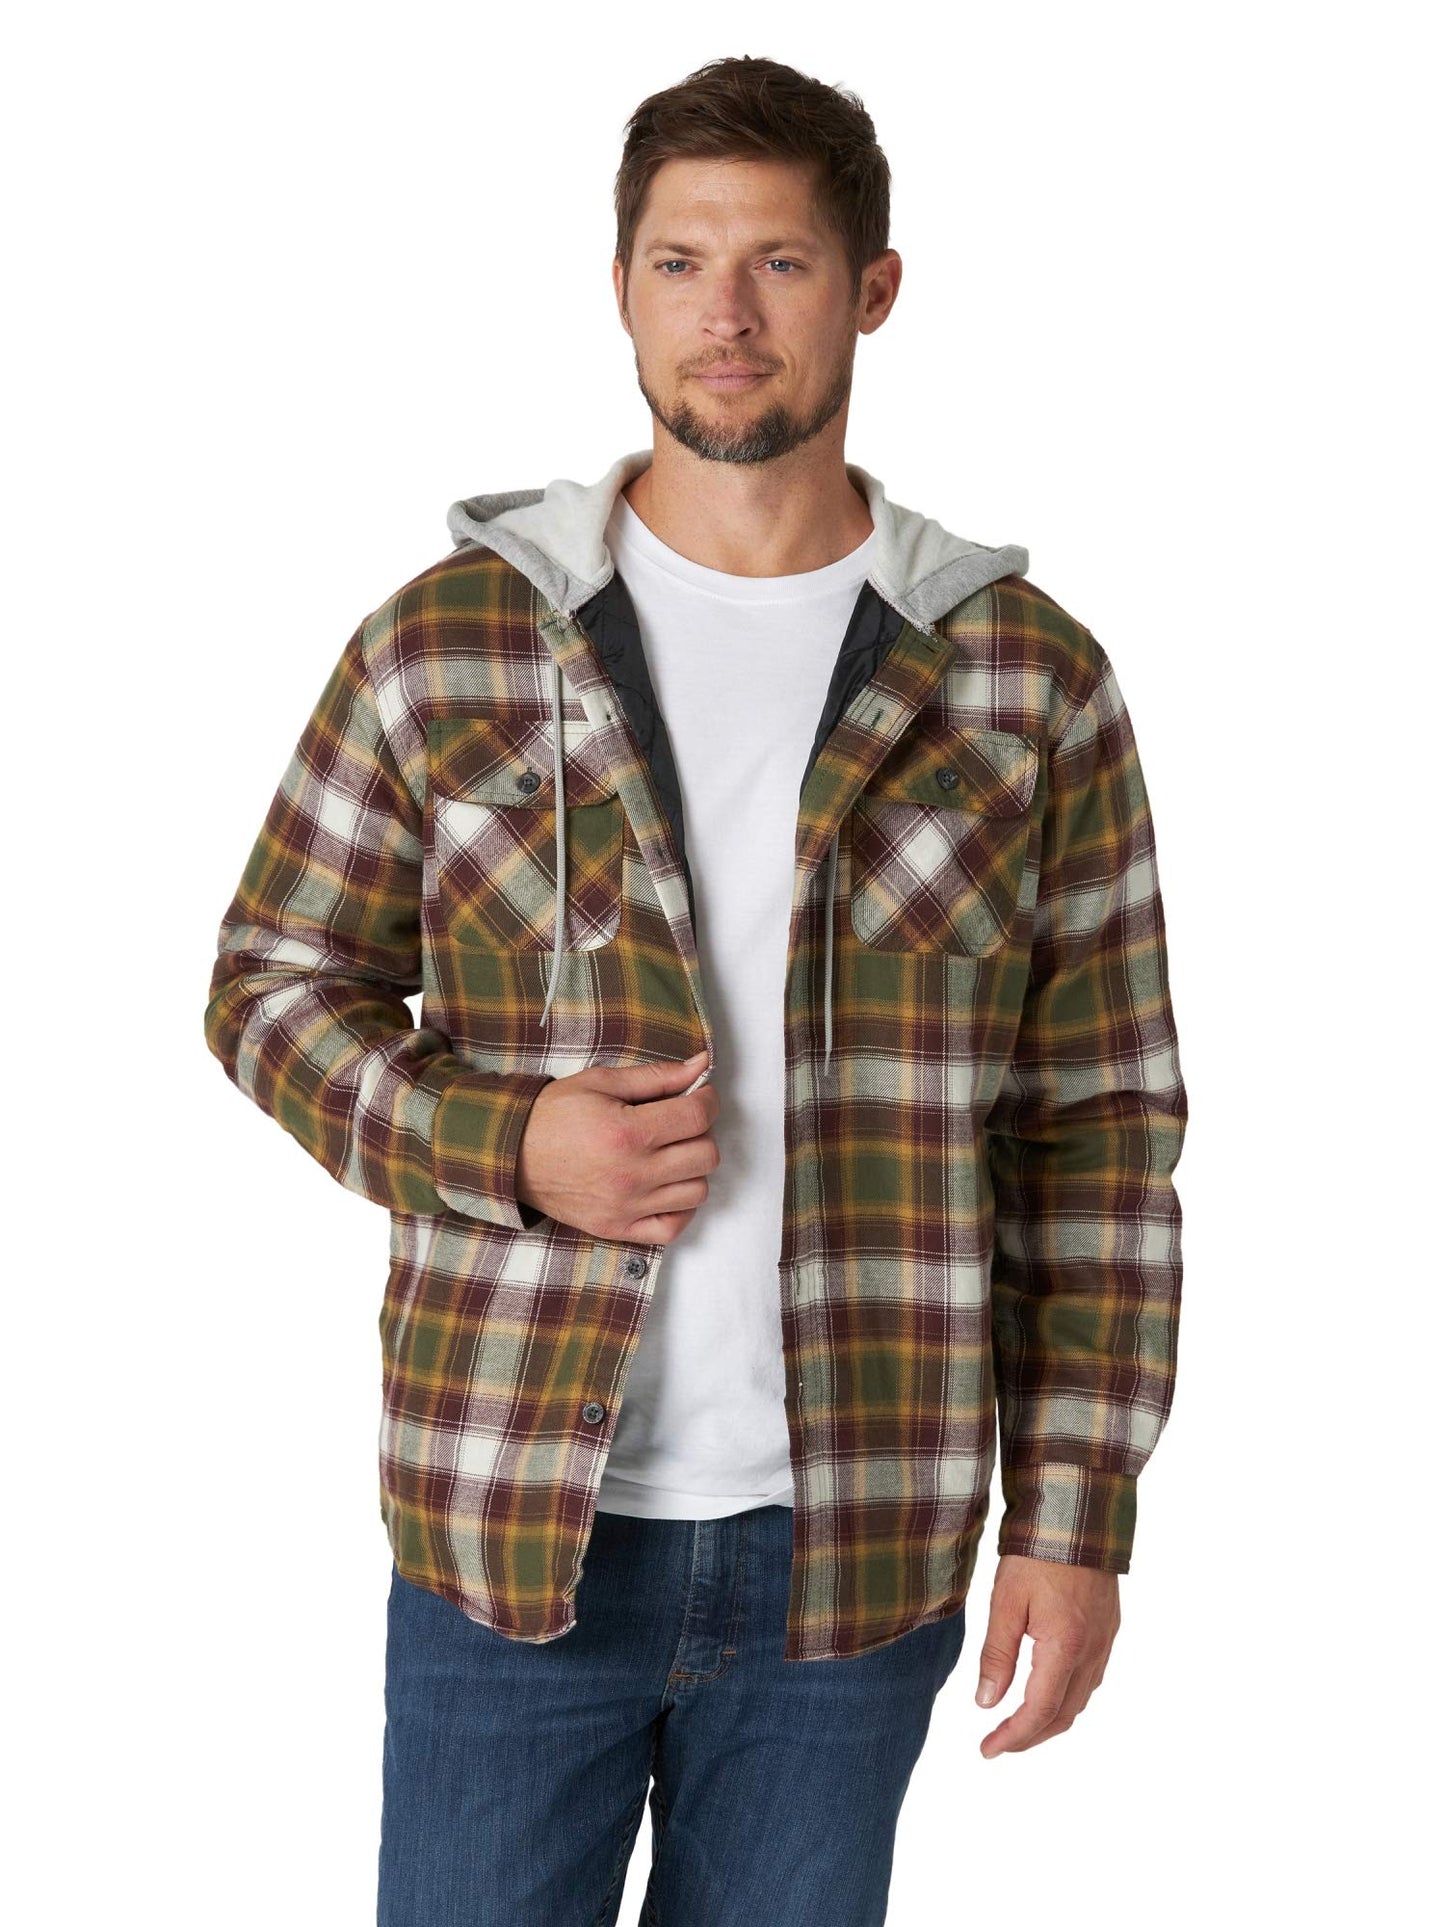 Wrangler Authentics Men's Long Sleeve Quilted Lined Flannel Shirt Jacket with Hood, Olive Night, Small